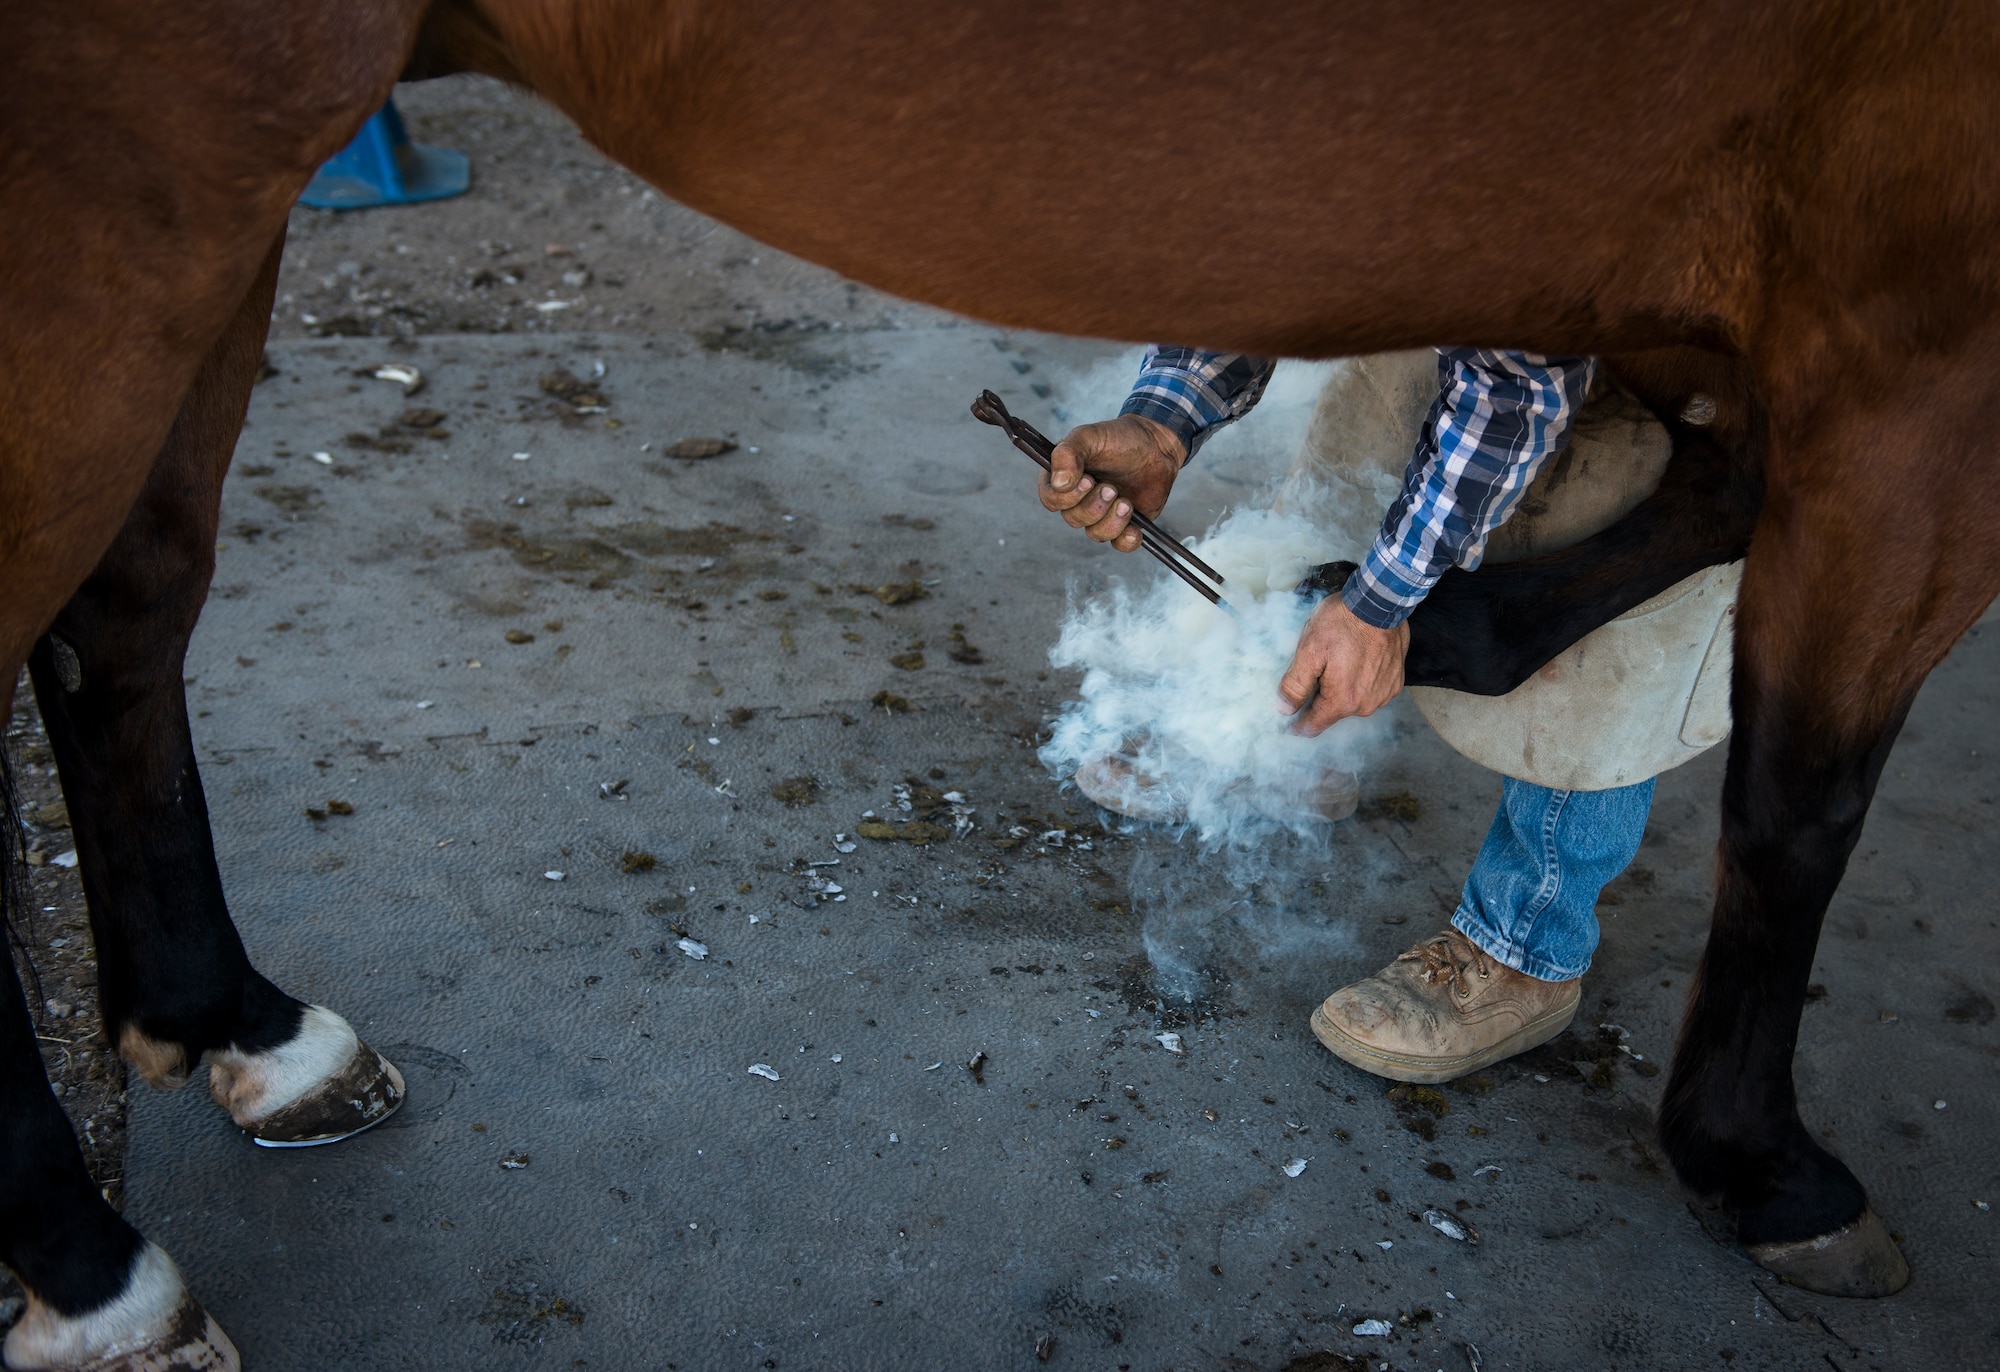 Chris Hume, an independent farrier on the central coast of California, re-shods a horse's hoof with a horseshoe that was heated until it was red-hot. The military horses get re-shodded every six weeks. (U.S. Air Force photo/Staff Sgt. Andrew Lee)